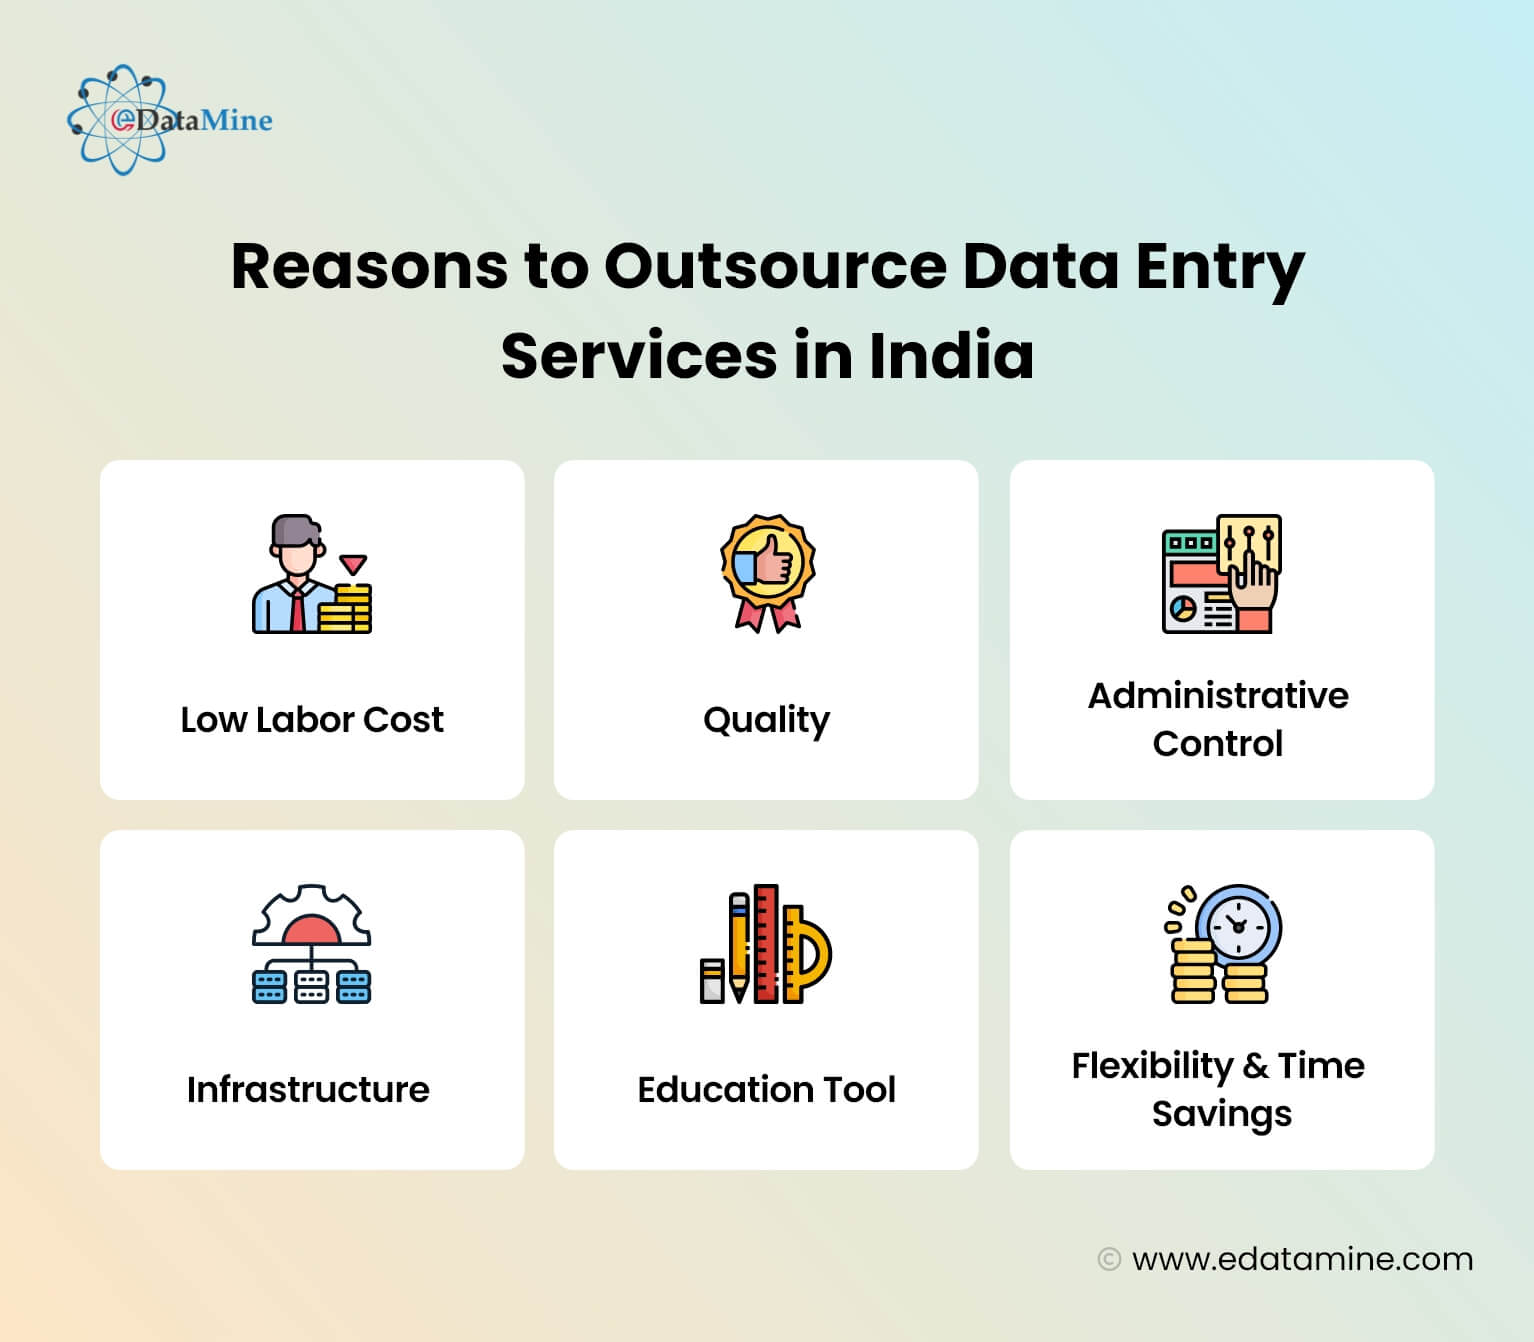 Reasons to Outsource Data Entry Services in India